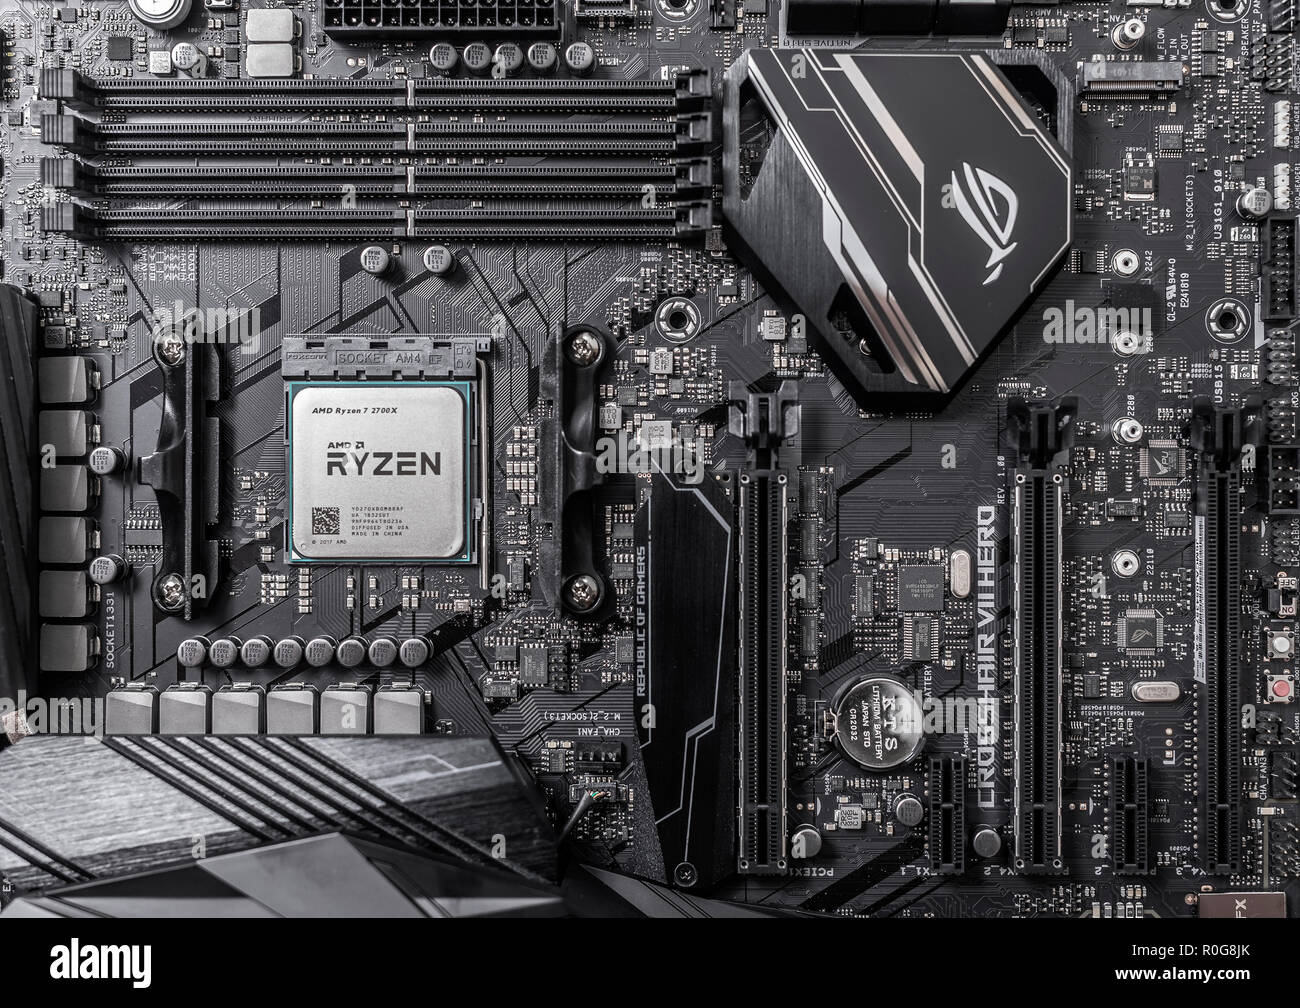 Processor Ryzen 7 2700X against the background of a computer motherboard  Asus rog crosshair vii hero Stock Photo - Alamy